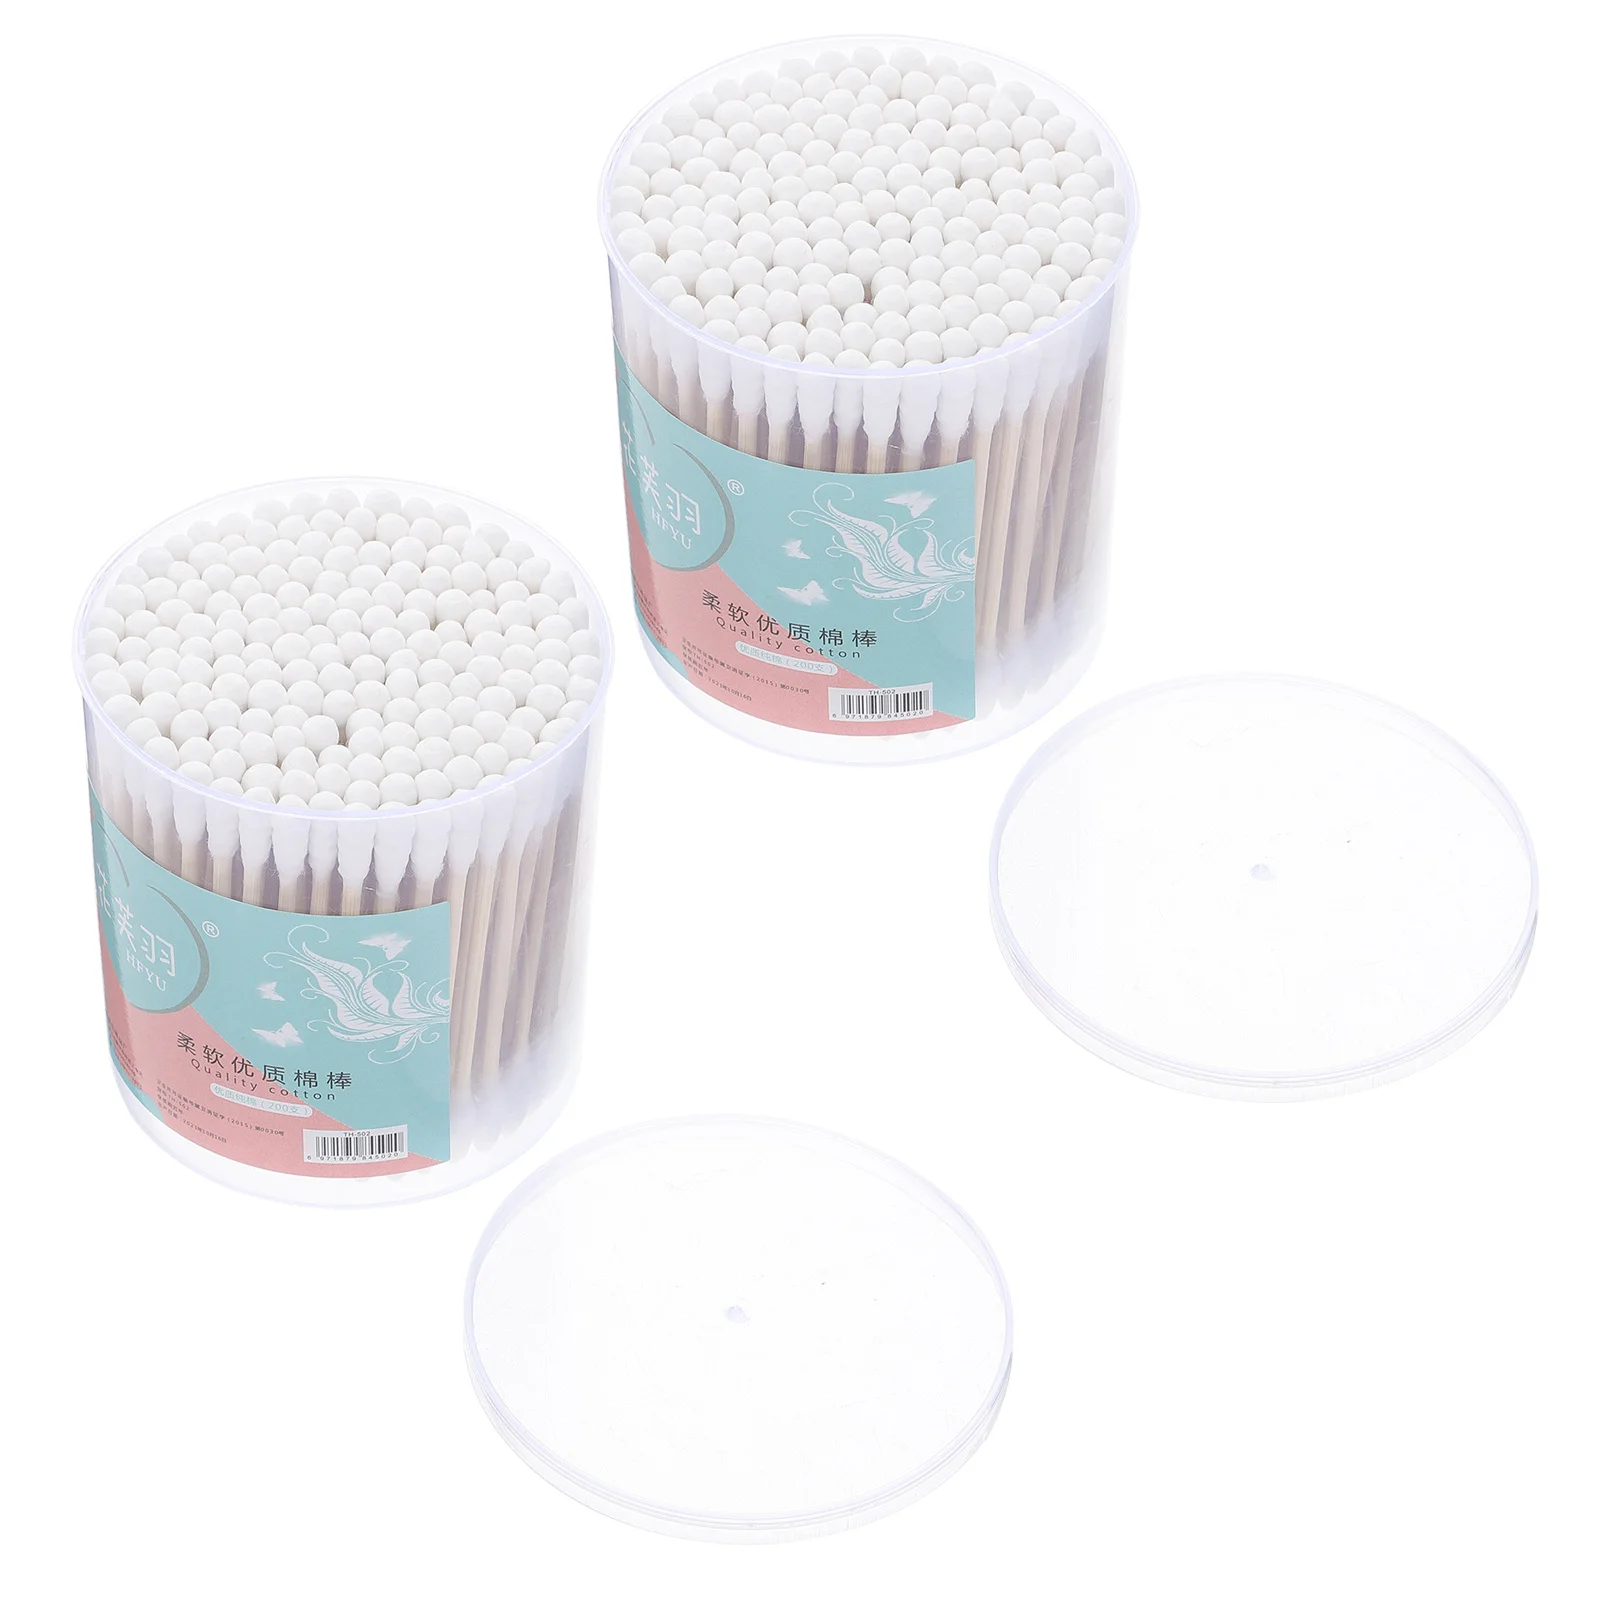 Baby Cotton Swabs 2 Box 400Pcs Baby Safety Swabs Double Spiral Tips Cotton Swabs Paper Sticks Natural Cotton Buds Ear 2 boxes professional cotton swabs safety cotton buds dual heads cotton swabs